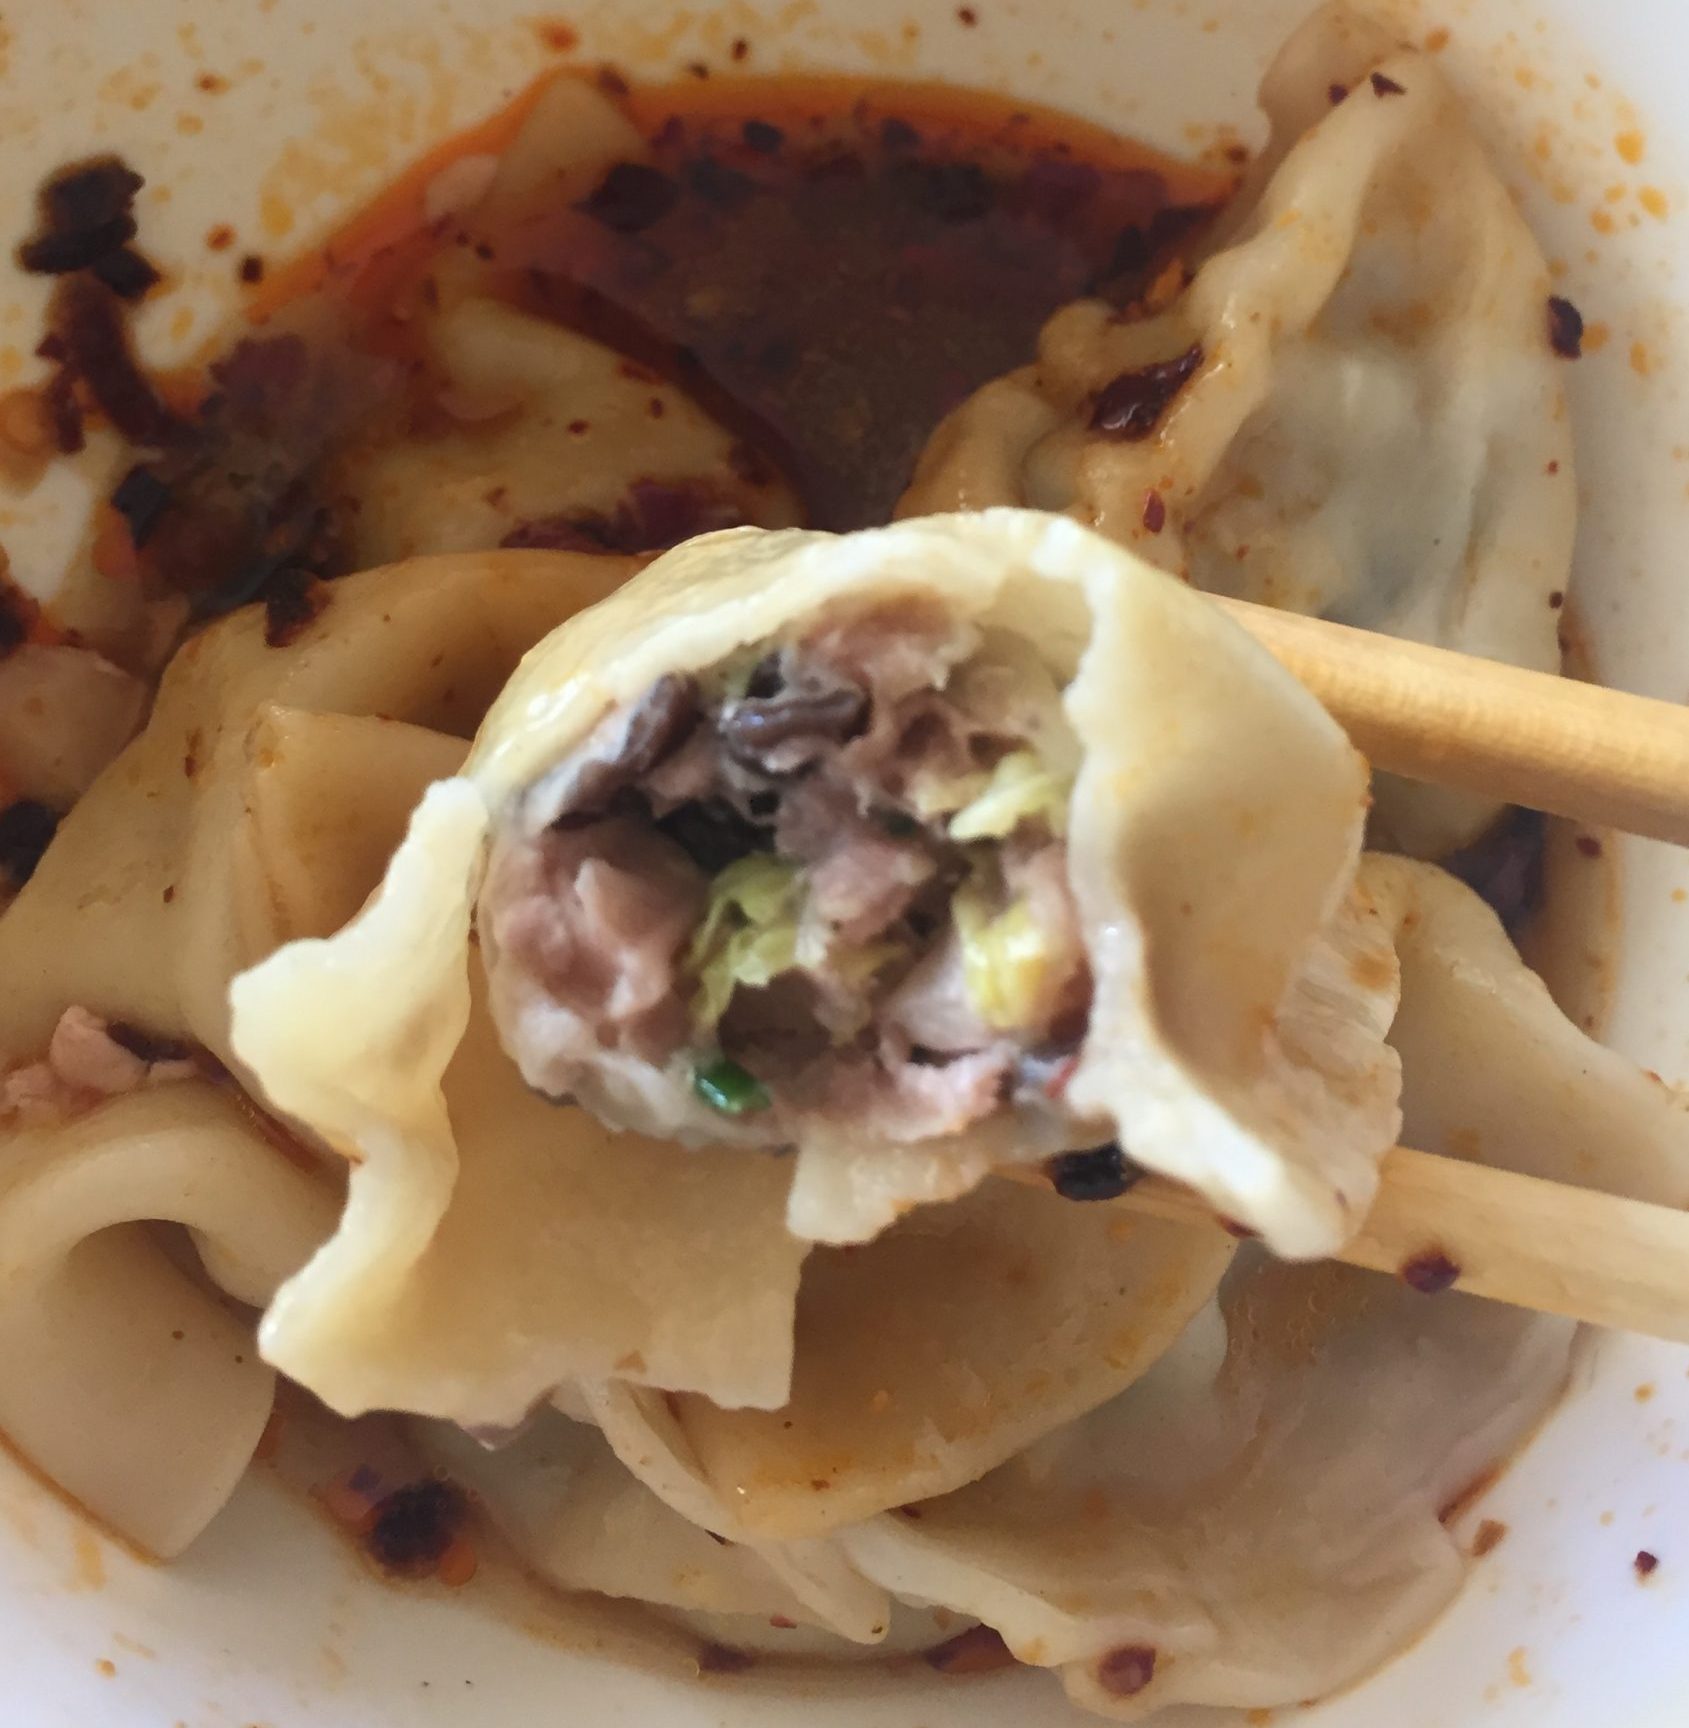 Dumplings with a delicious filling